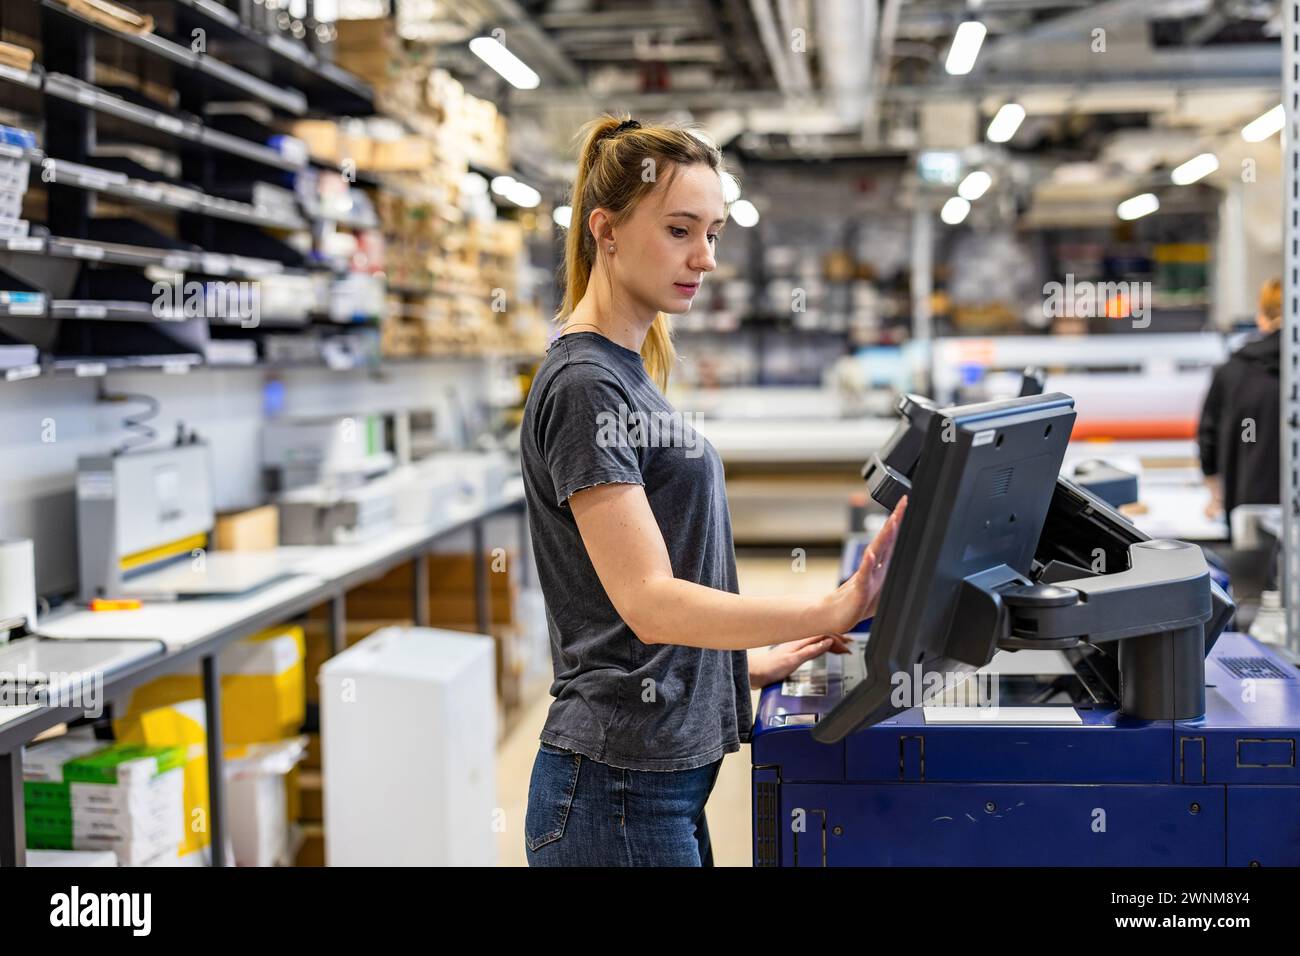 Woman working in a printing factory Stock Photo